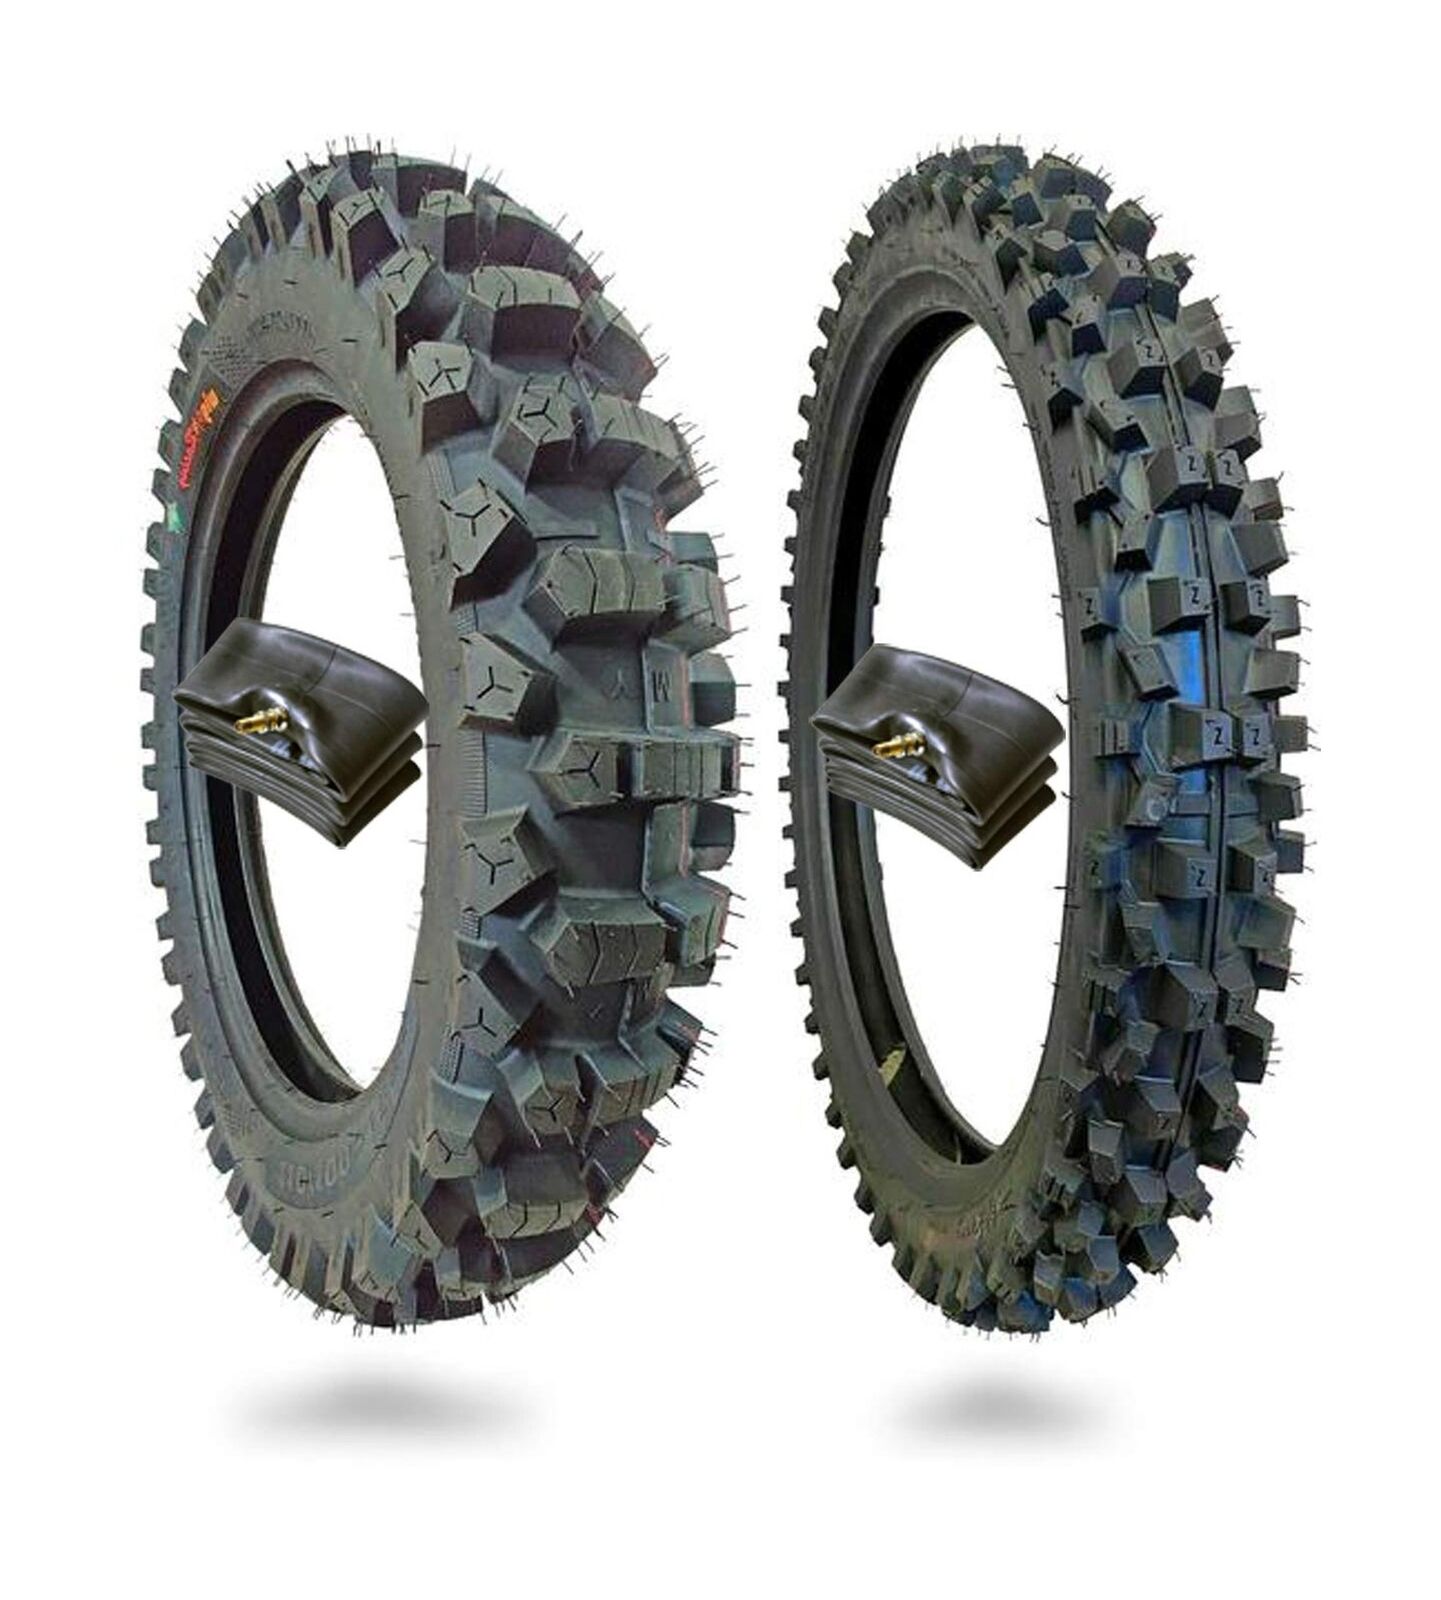 WIG Racing 110/90-19 and 80/100-21 Motocross Dirt Bike Tires With Inner Tubes